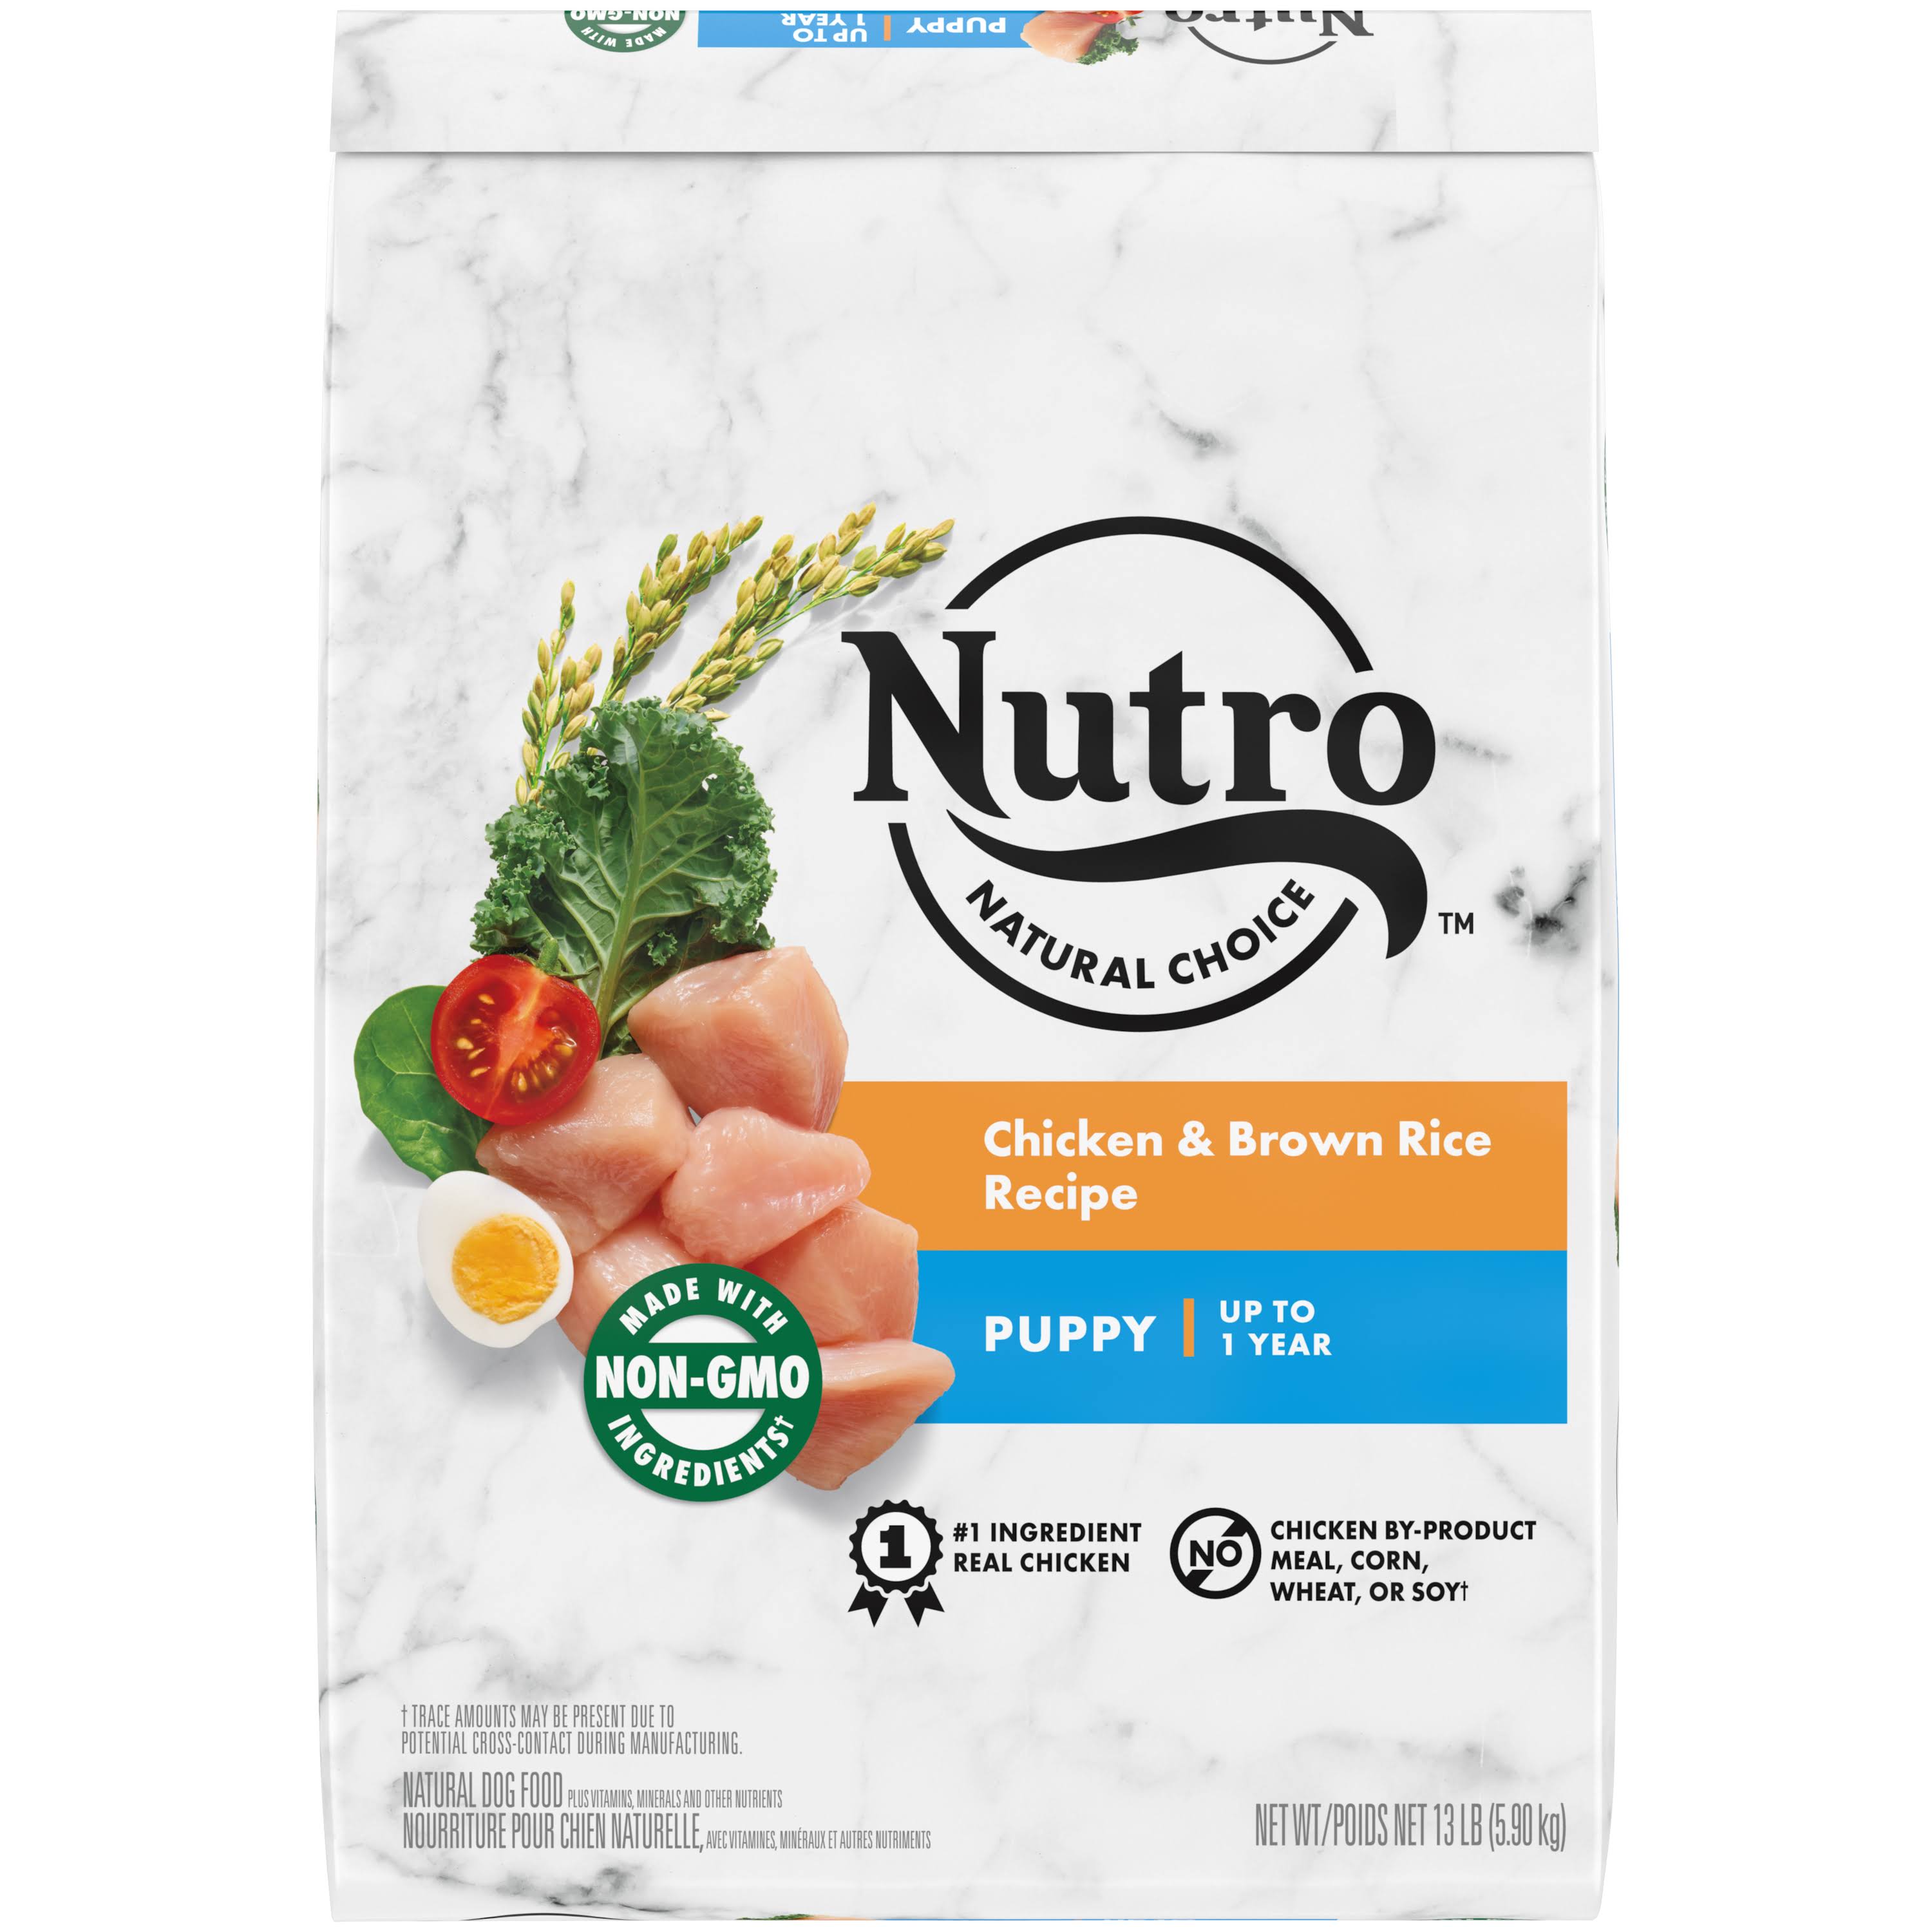 Nutro Natural Choice Puppy Chicken & Brown Rice Recipe Dry Dog Food